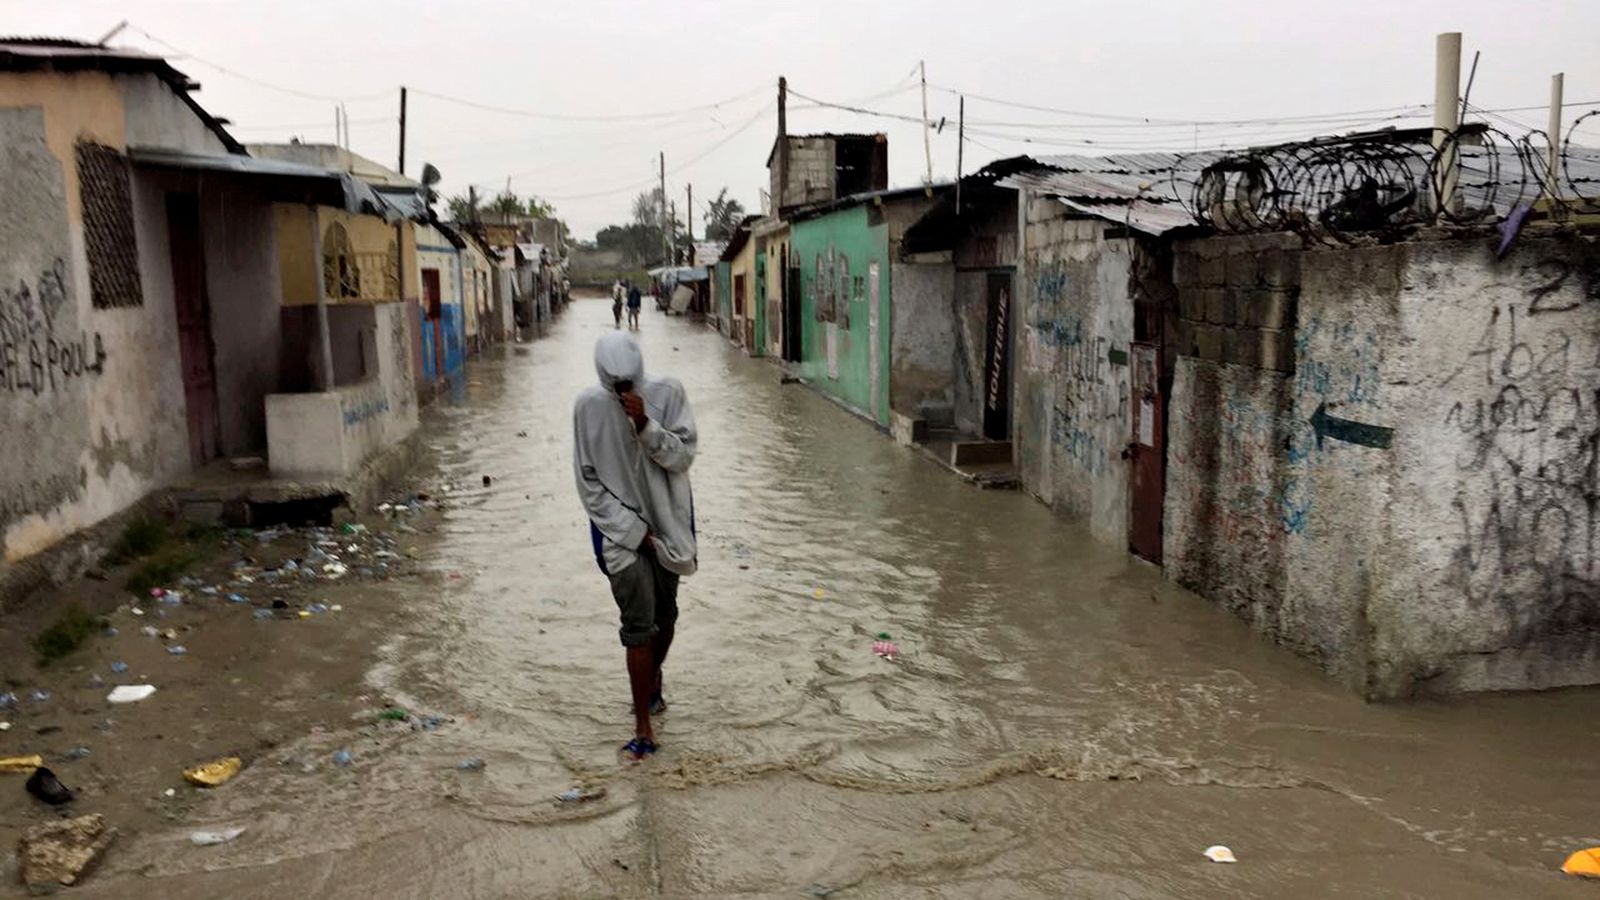 Hurricane Matthew batters Haiti, a country still recovering from 2010 earthquake